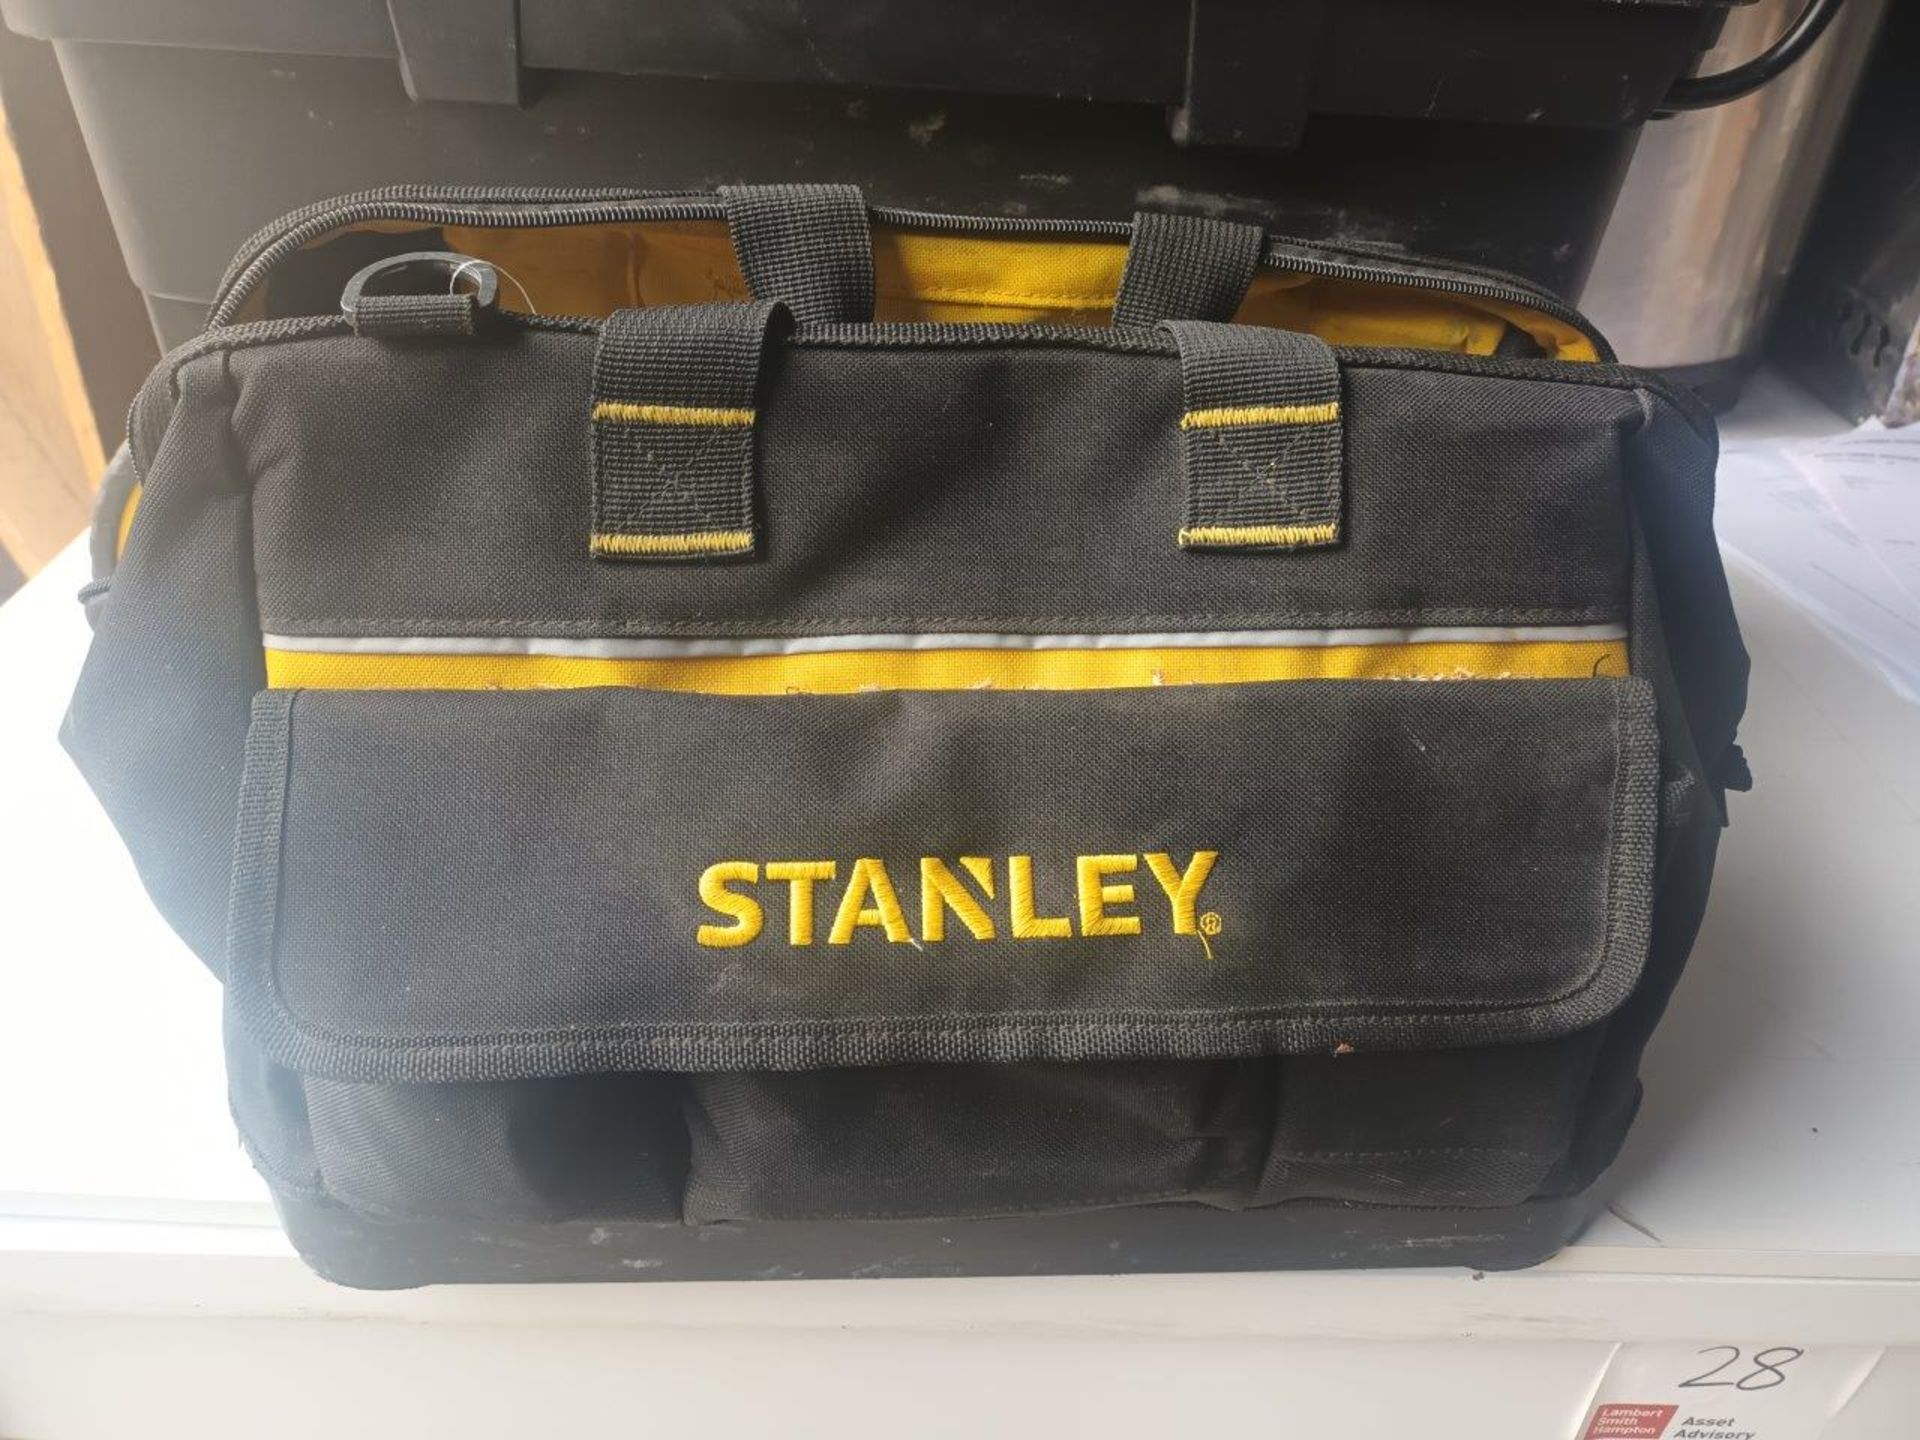 Stanley tool box on wheels and Stanley tool bag with various hand tools - Image 2 of 4